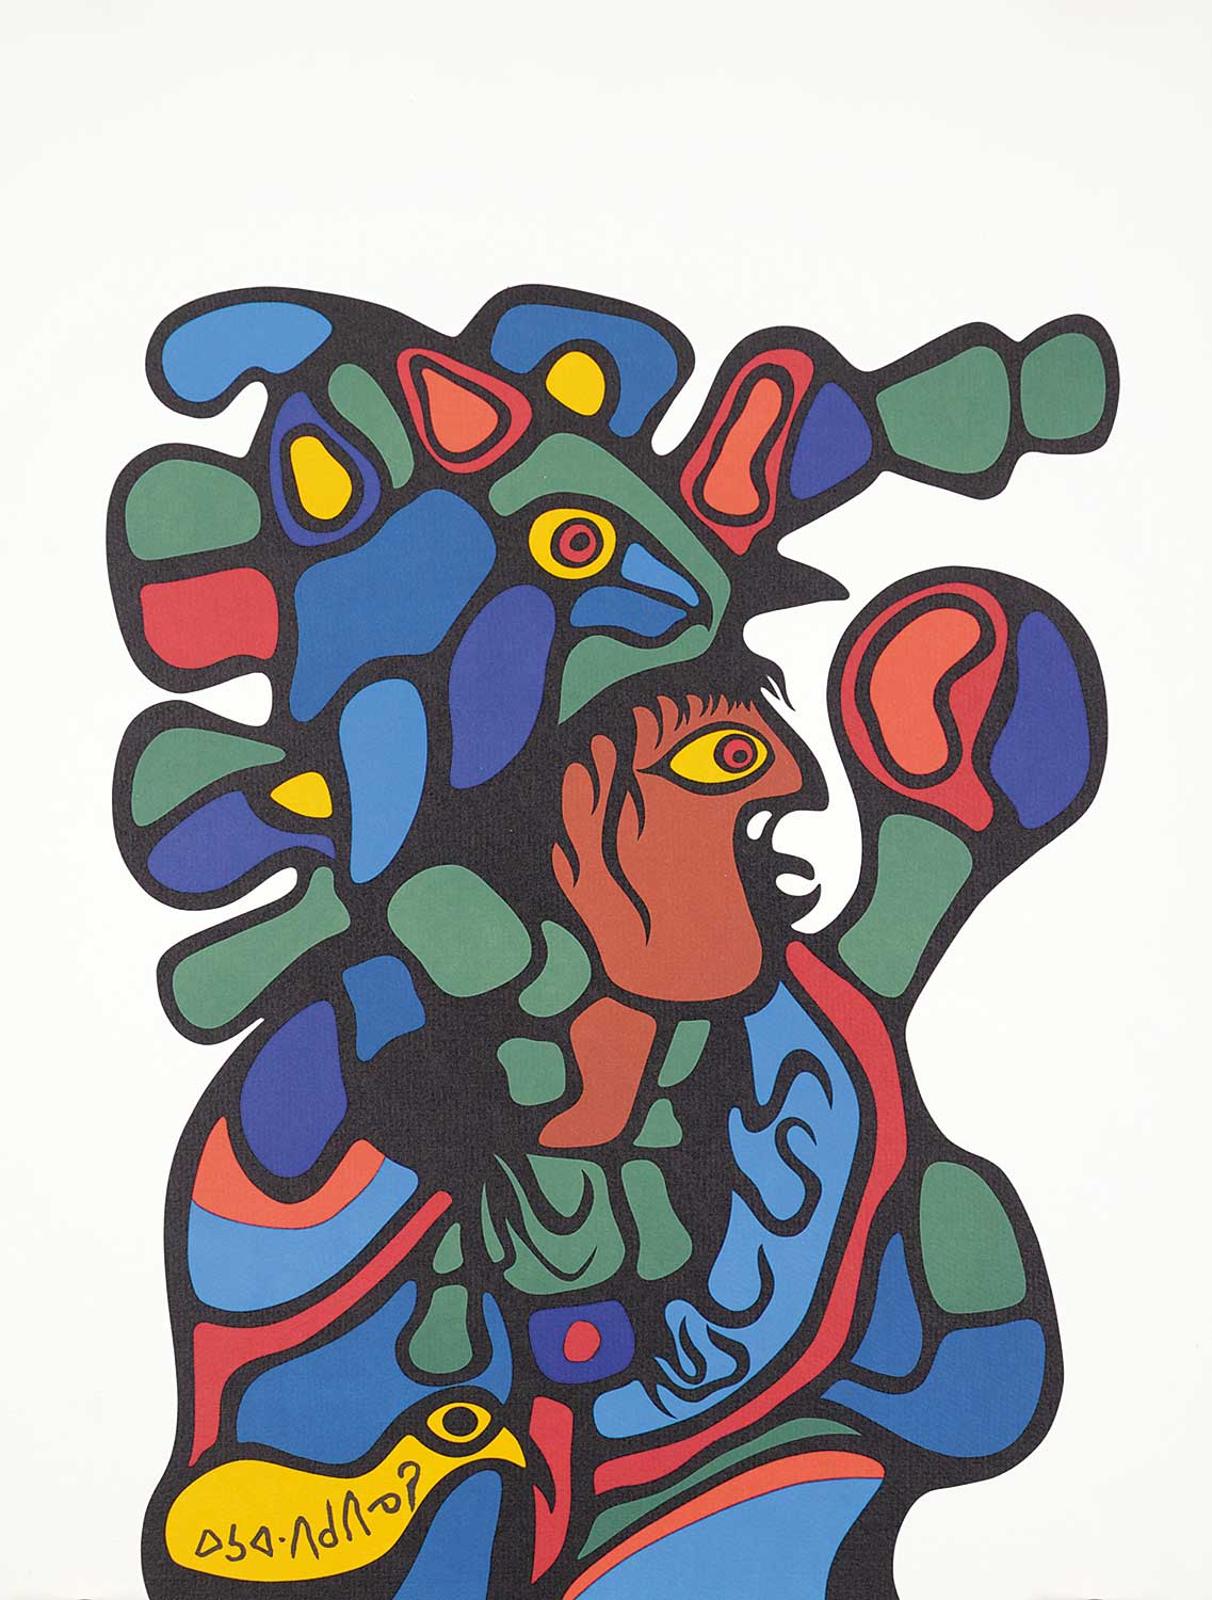 Norval H. Morrisseau (1931-2007) - Untitled - Shaman with Yellow Bird